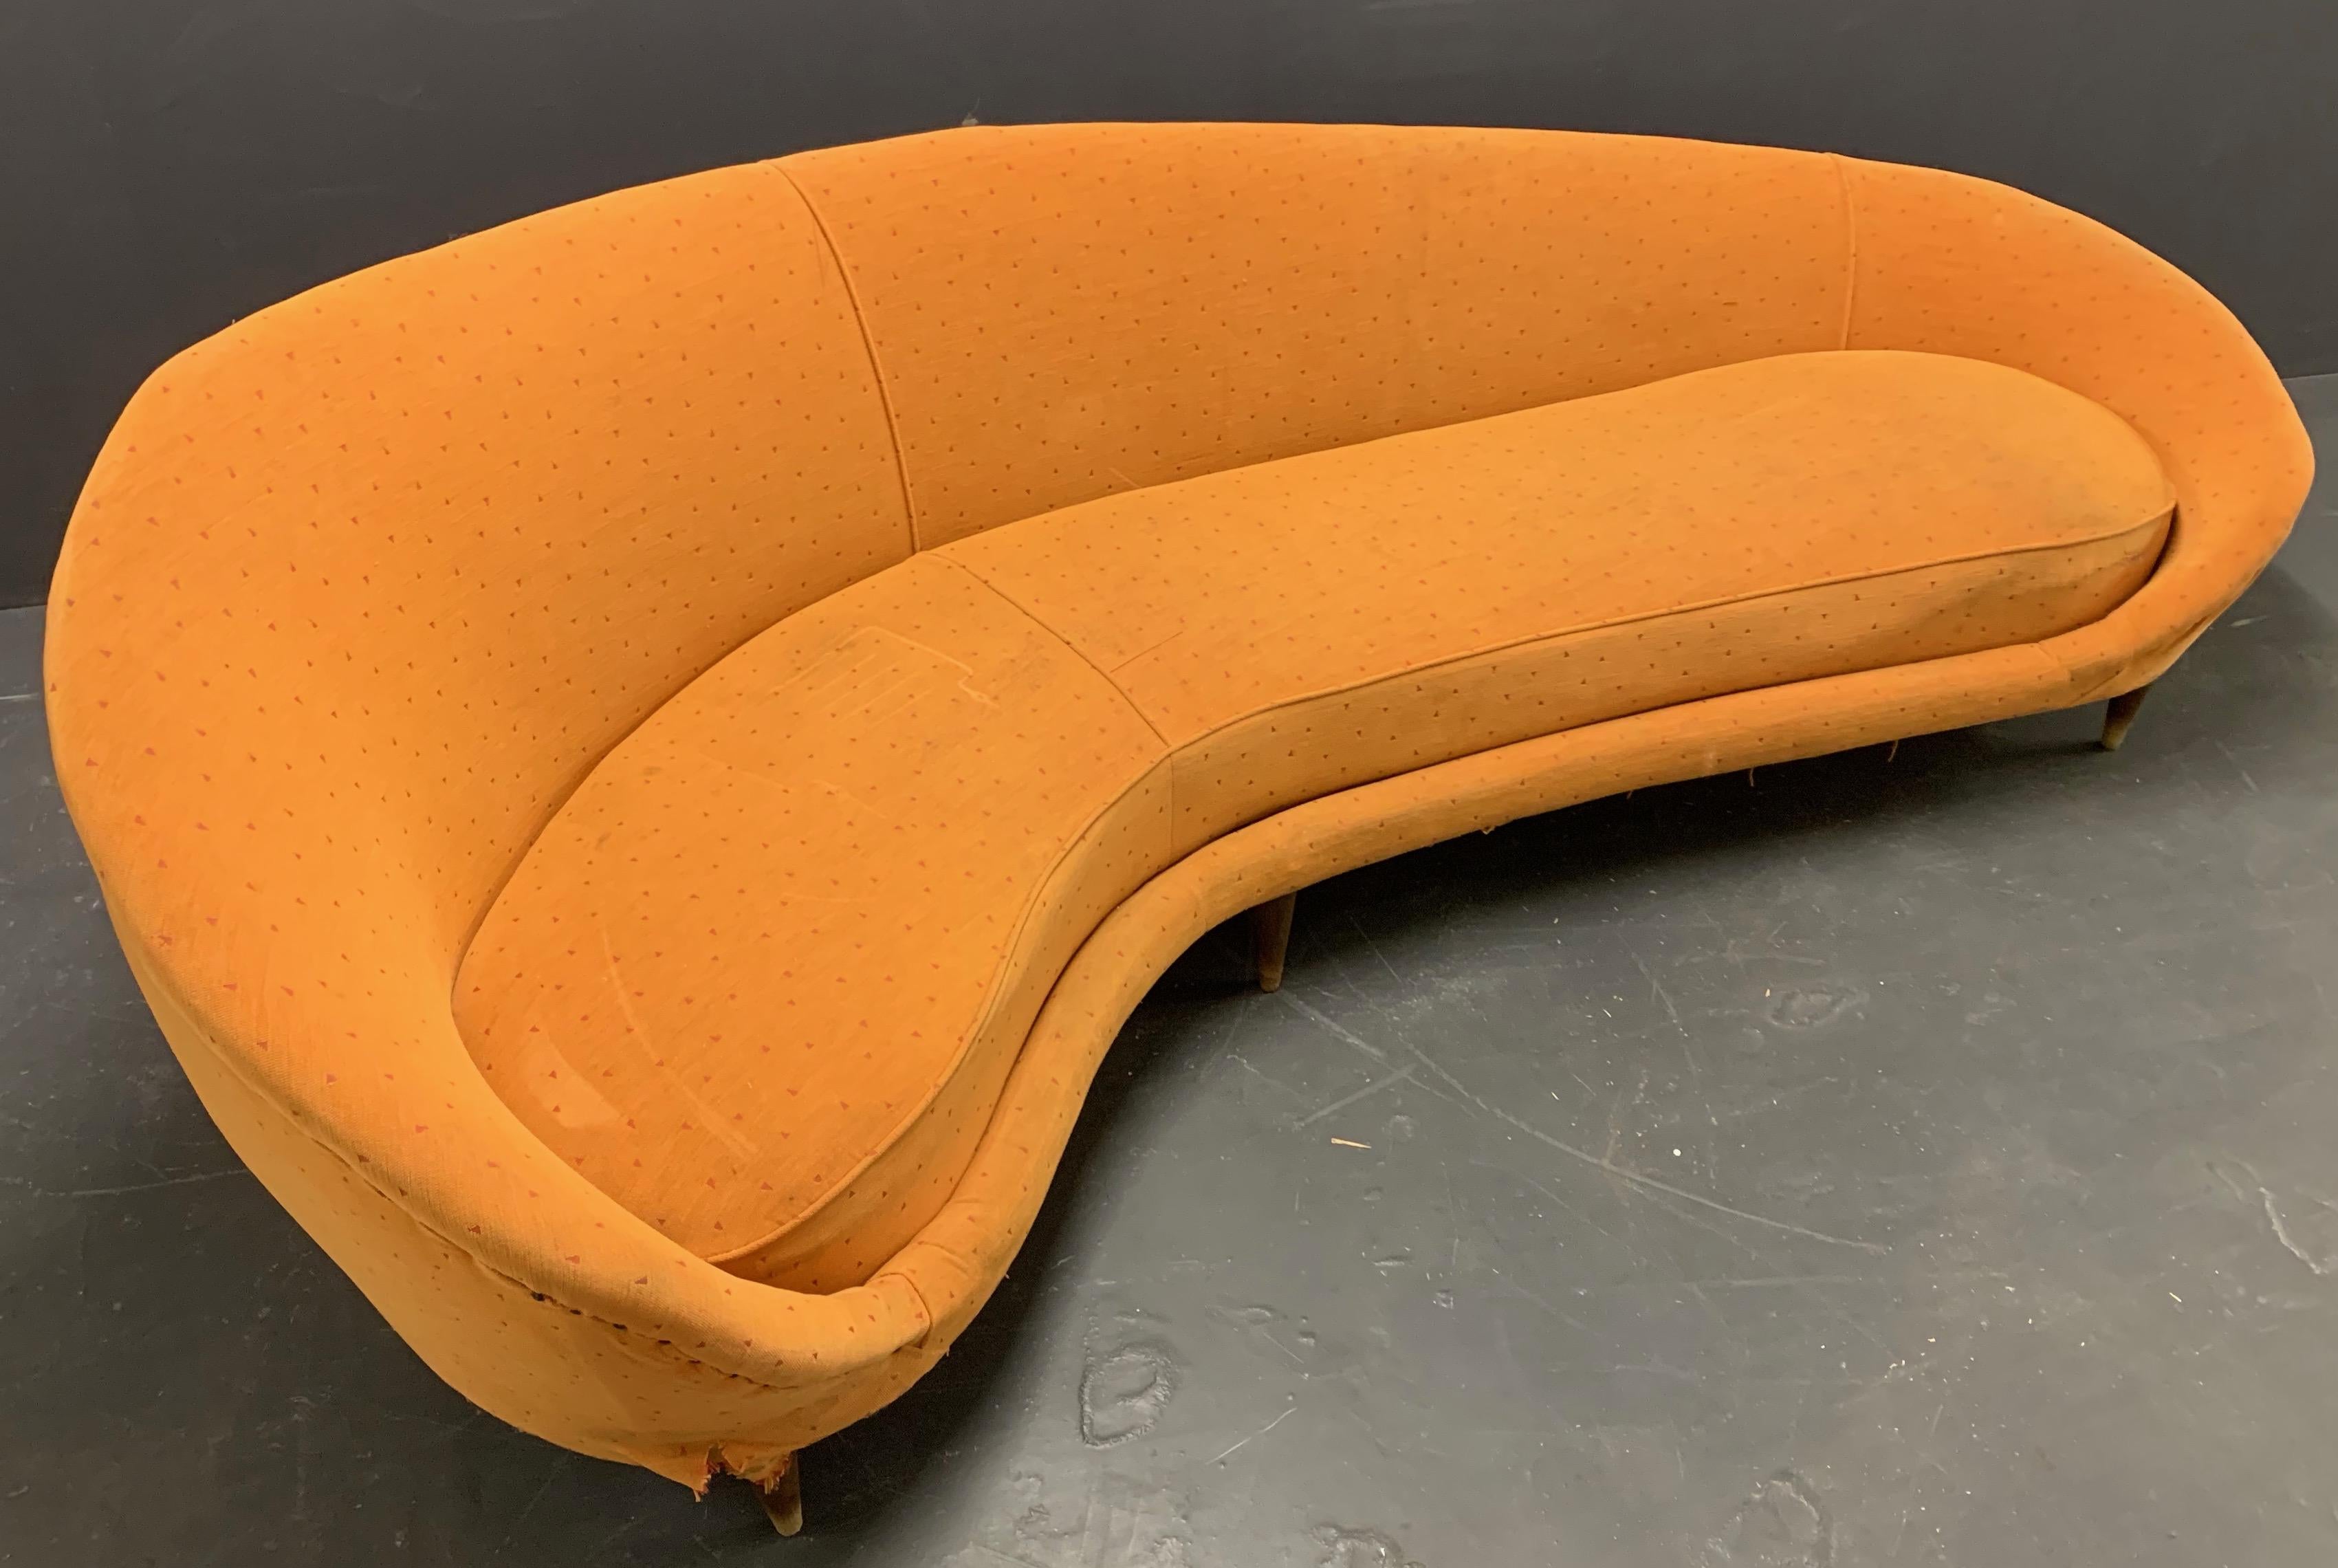 You have the rare opportunity to buy an original and vintage sofa, that is designed by Ico Parisi and often attributed to Frederico Munari. You can find many unauthorized new copies of this design, but seldom an old and original one. I kept it as is